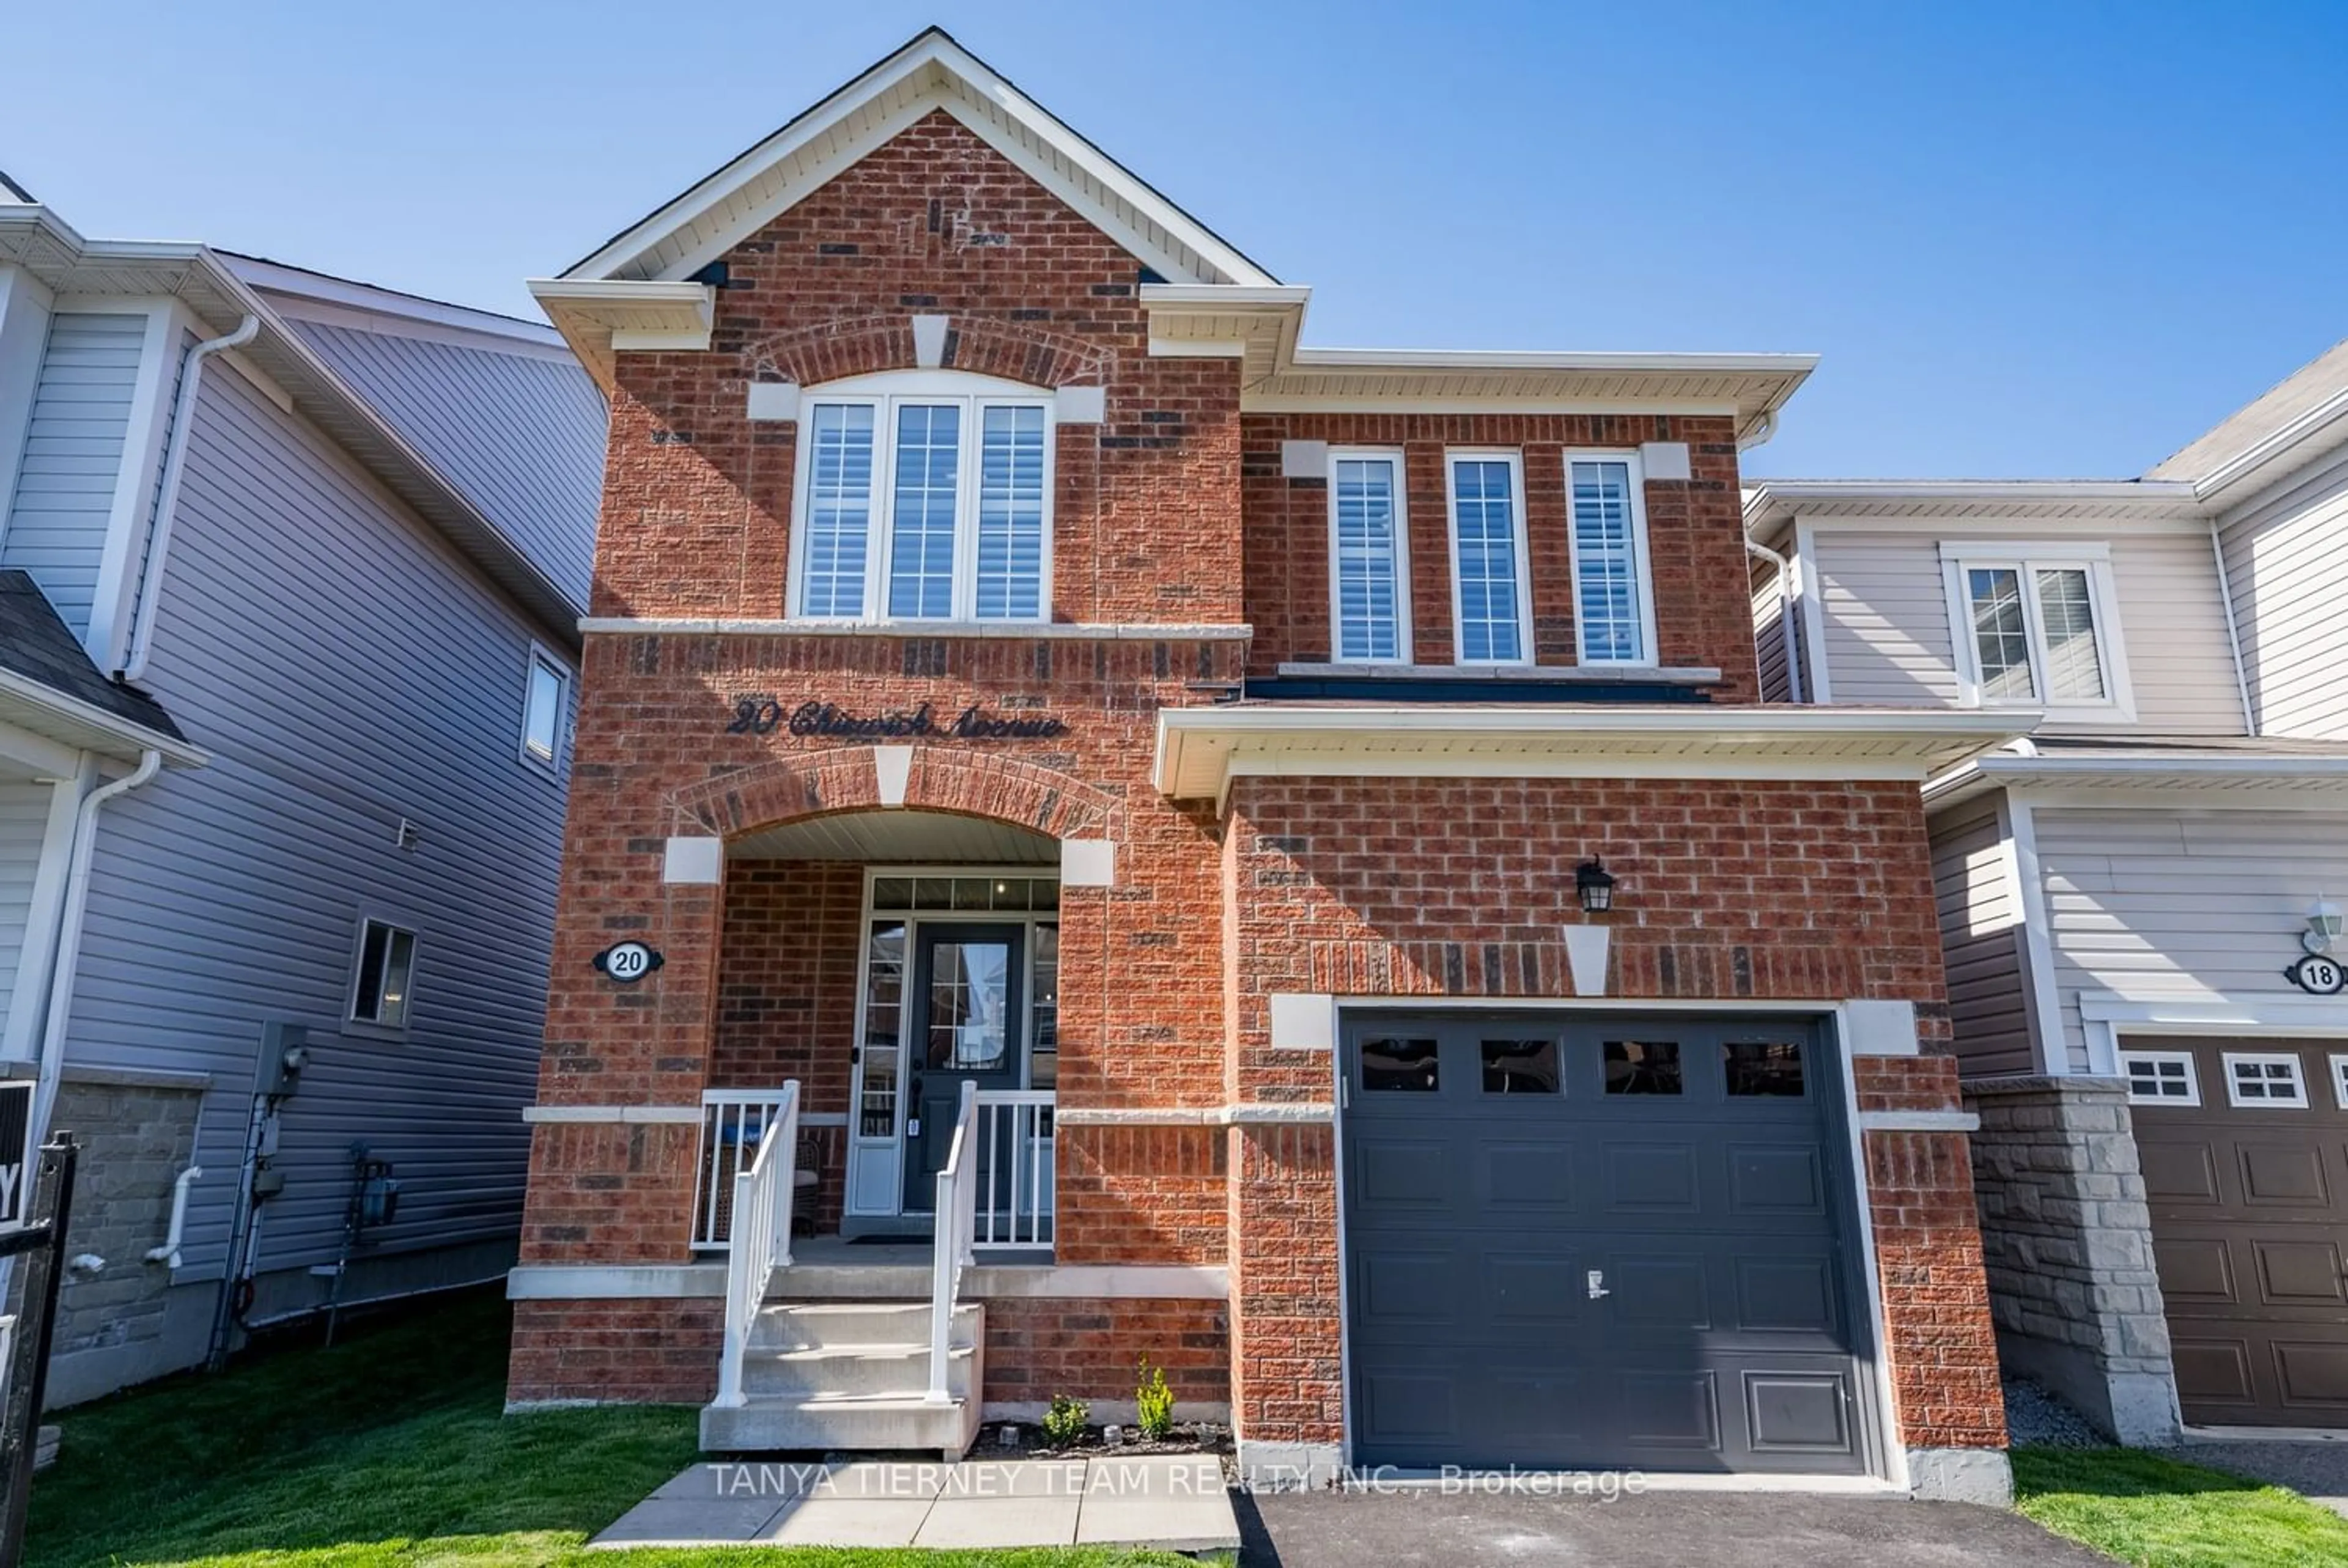 Home with brick exterior material for 20 Chiswick Ave, Whitby Ontario L1M 0E1